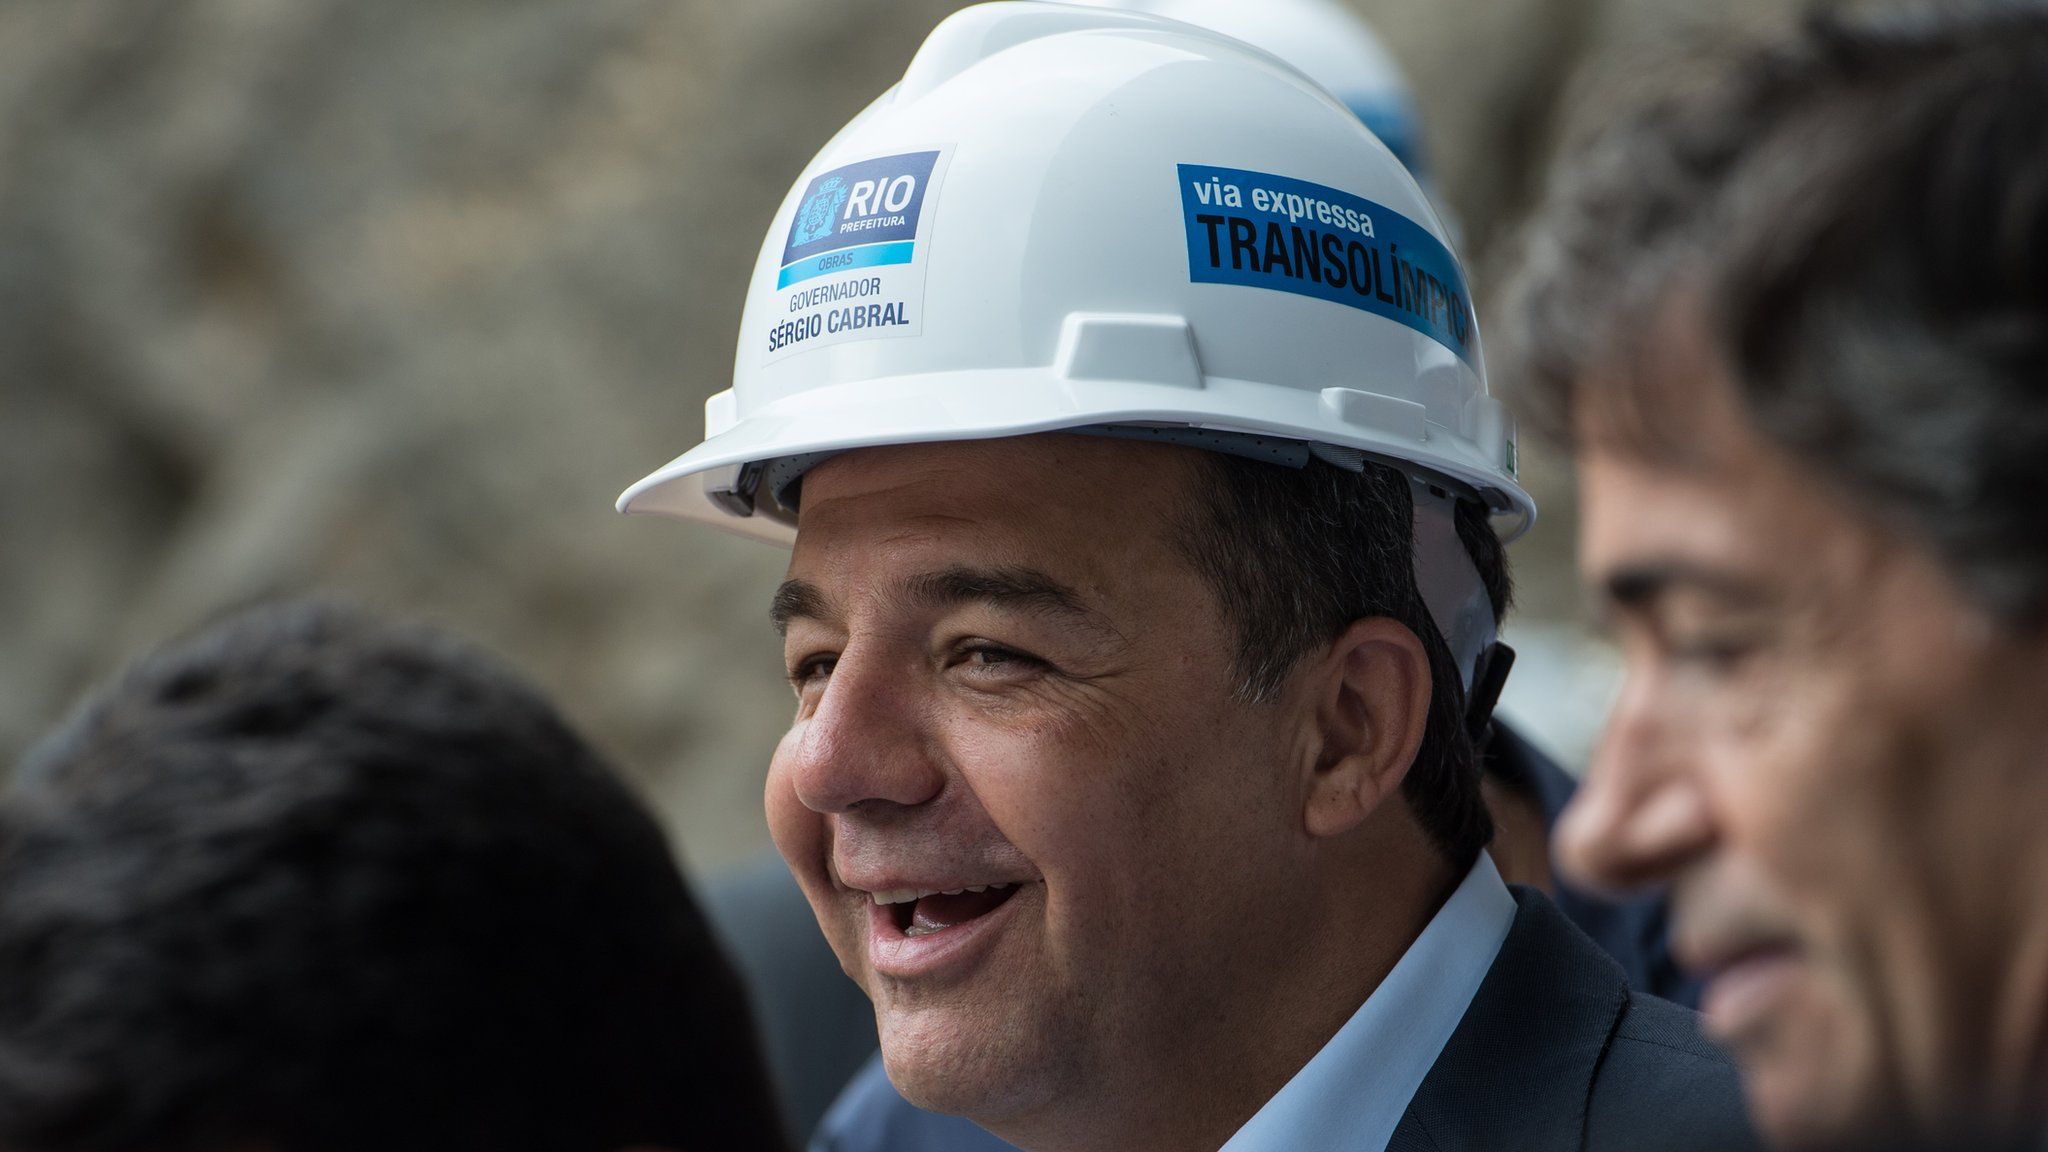 Rio de Janerio's Governor Sergio Cabral smiles as he visits the site of the construction of a new tunnel to the Transolimpica expressway in Rio de Janeiro, Brazil, on November 08, 2013.